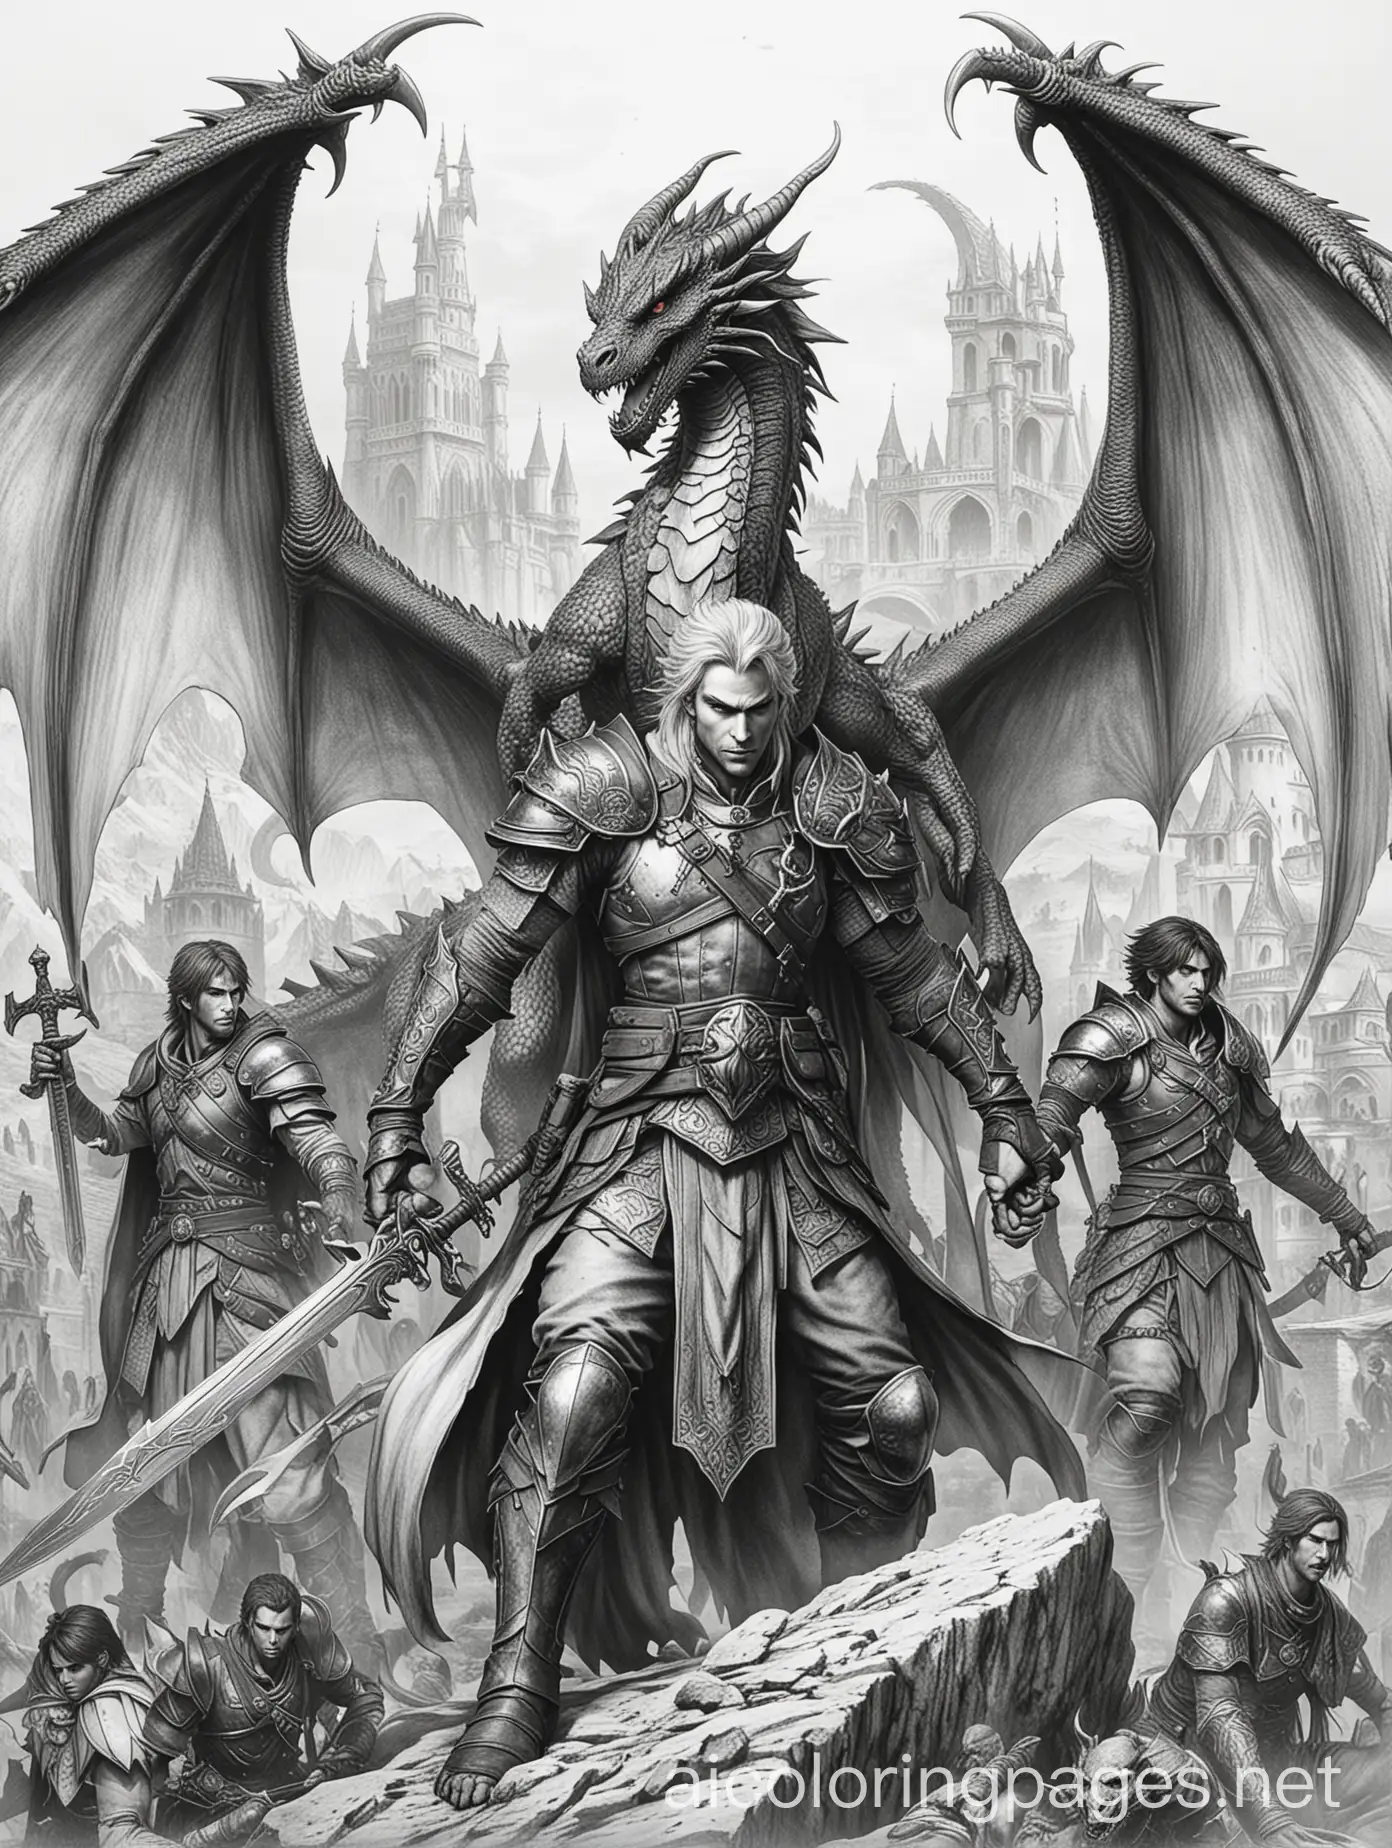 Dragons dogma 2, Coloring Page, black and white, line art, white background, Simplicity, Ample White Space. The background of the coloring page is plain white to make it easy for young children to color within the lines. The outlines of all the subjects are easy to distinguish, making it simple for kids to color without too much difficulty